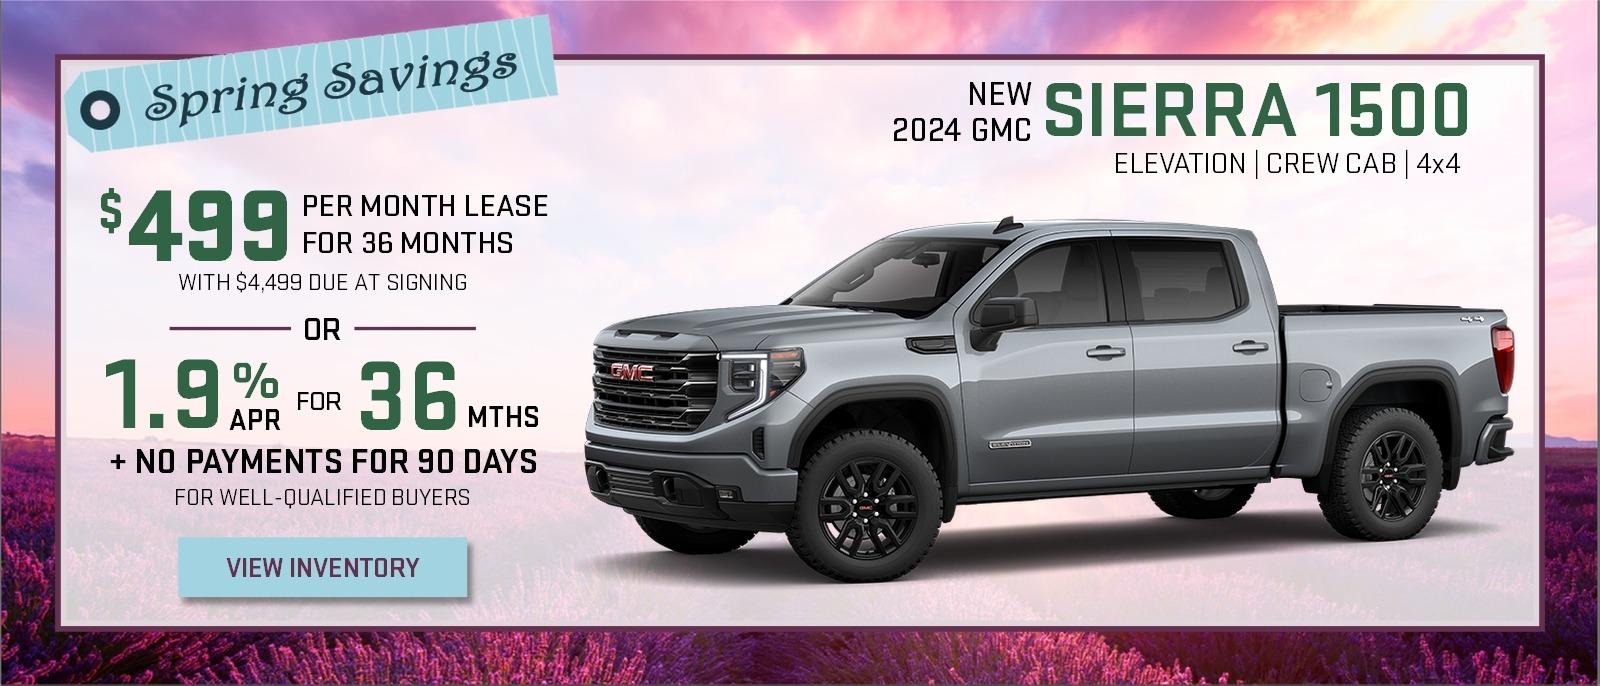 Spring Savings
New 2024 GMC Sierra 1500 Elevation Crew Cab 4x4
$499 per month for 36 months with $4,499 due at signing
or
1.9% APR for 36 months
PLUS NO PAYMENTS FOR 90 DAYS for well-qualified buyers
View Inventory